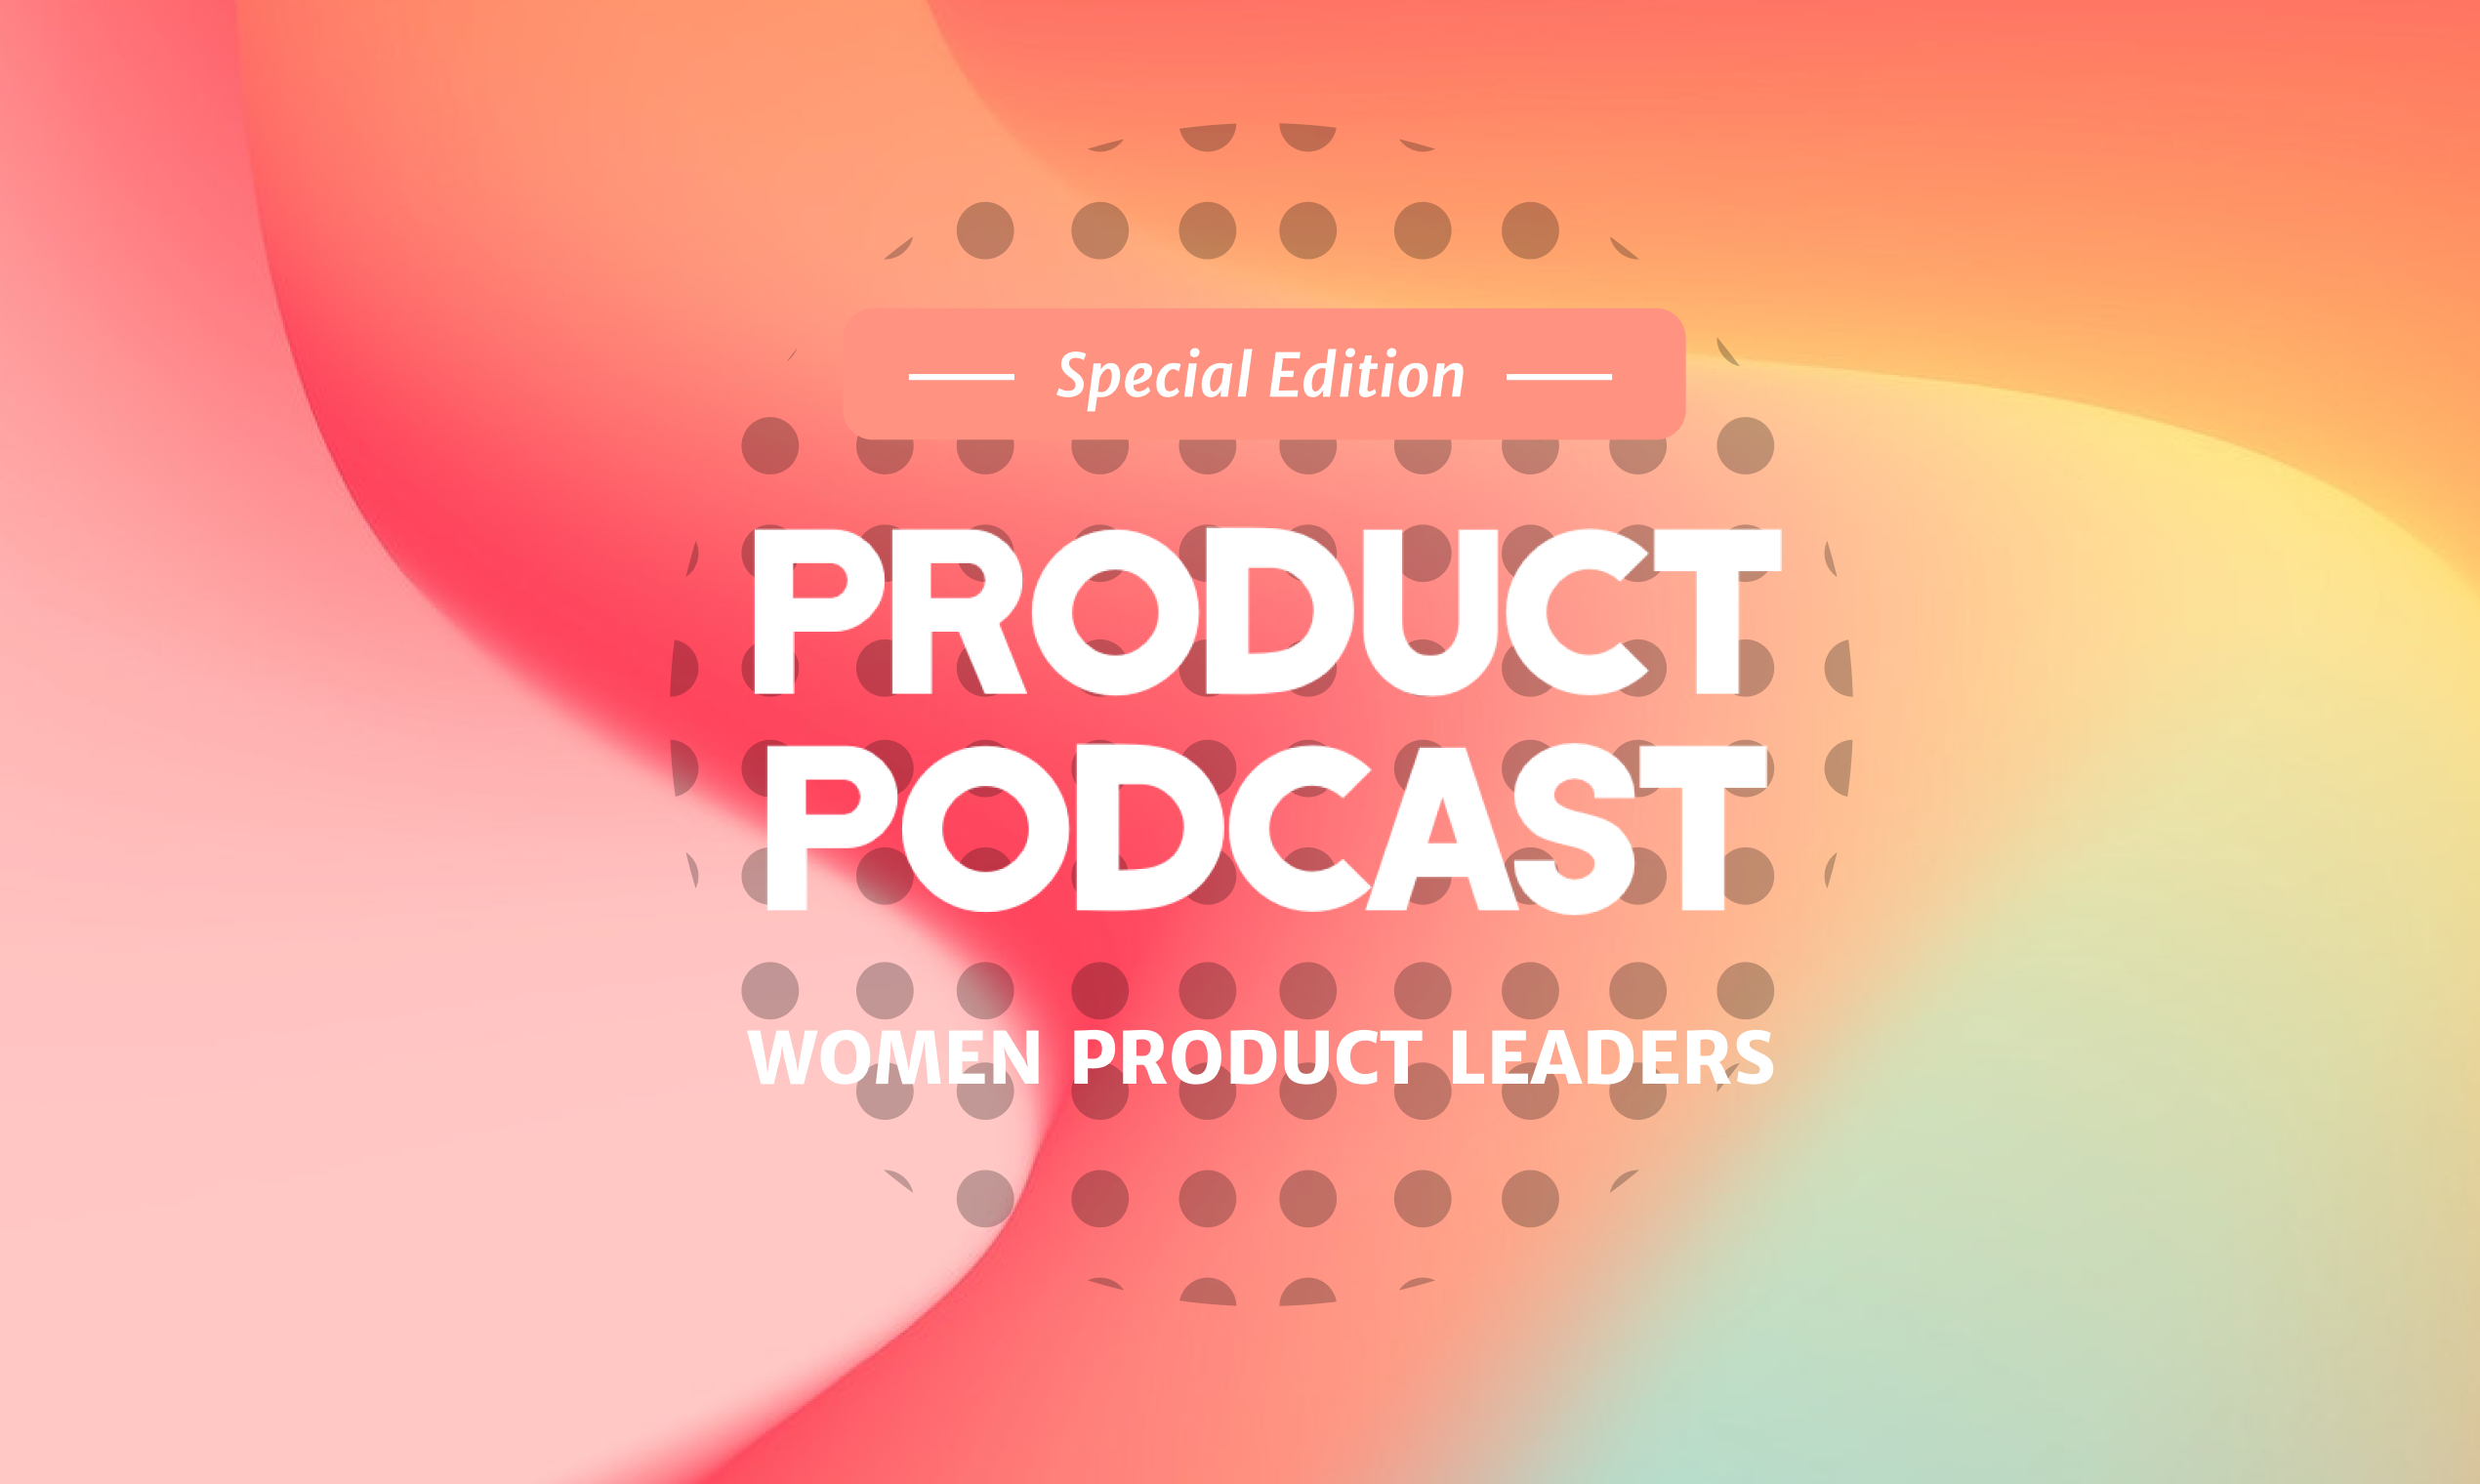 Women Product Leaders Podcast